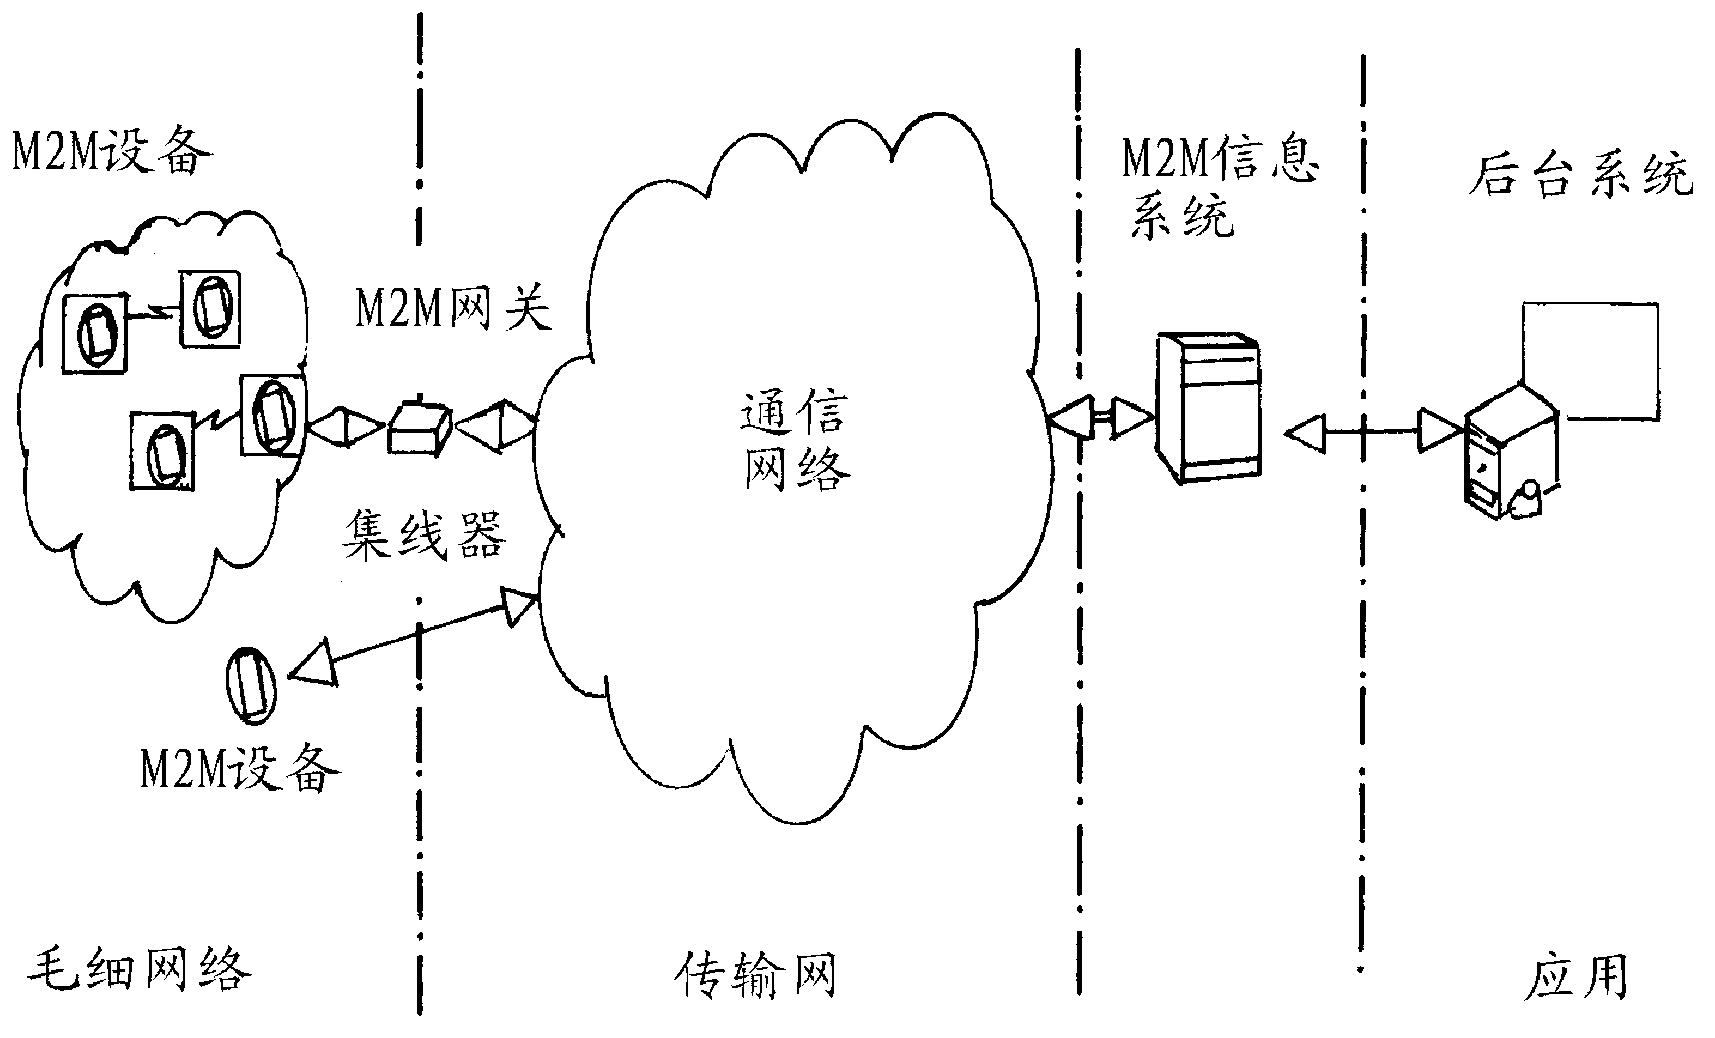 Handling of M2M services in a communication system